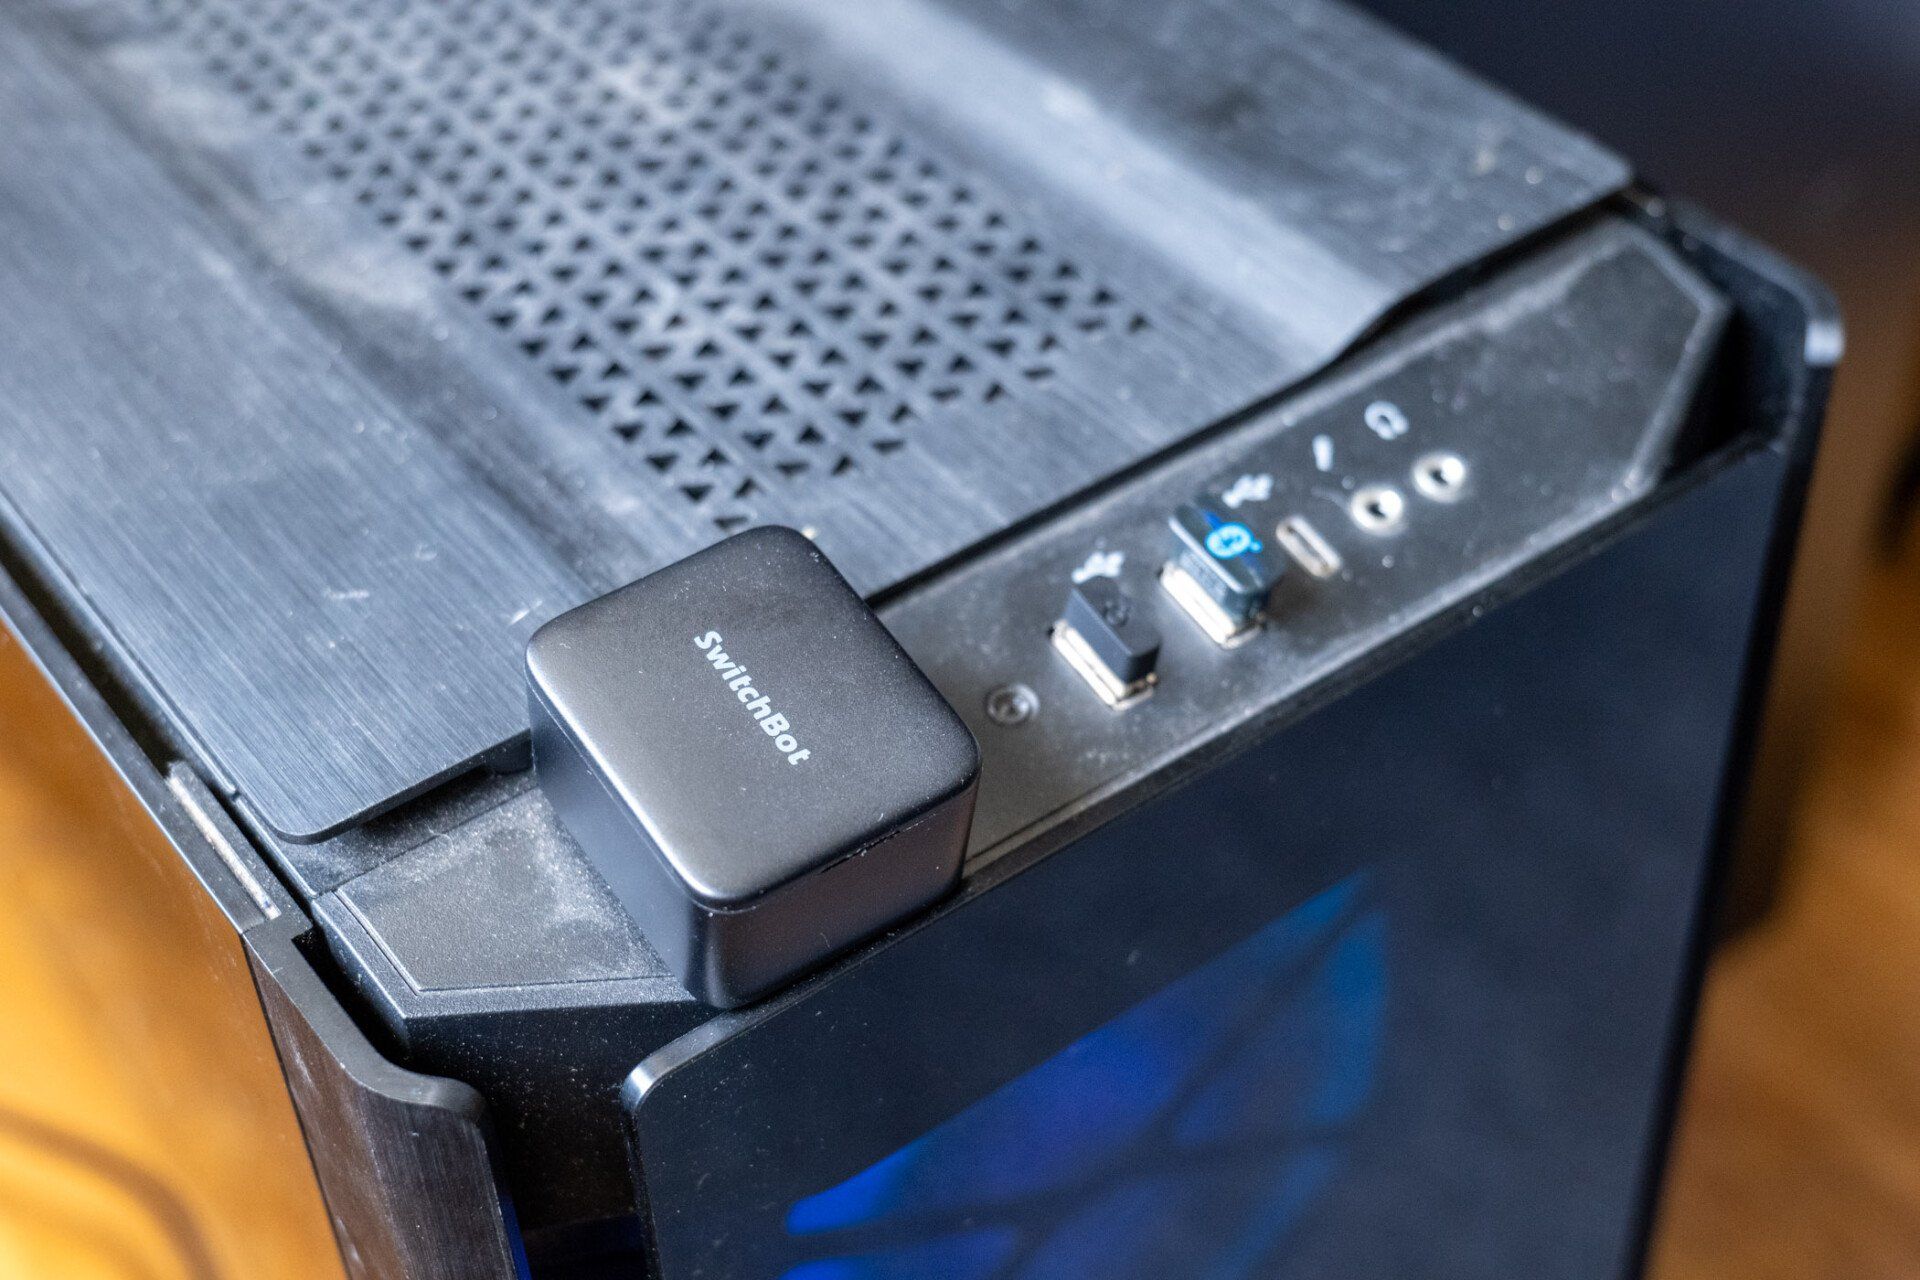 Matter alpha switchbot button presser attached to a gaming pc